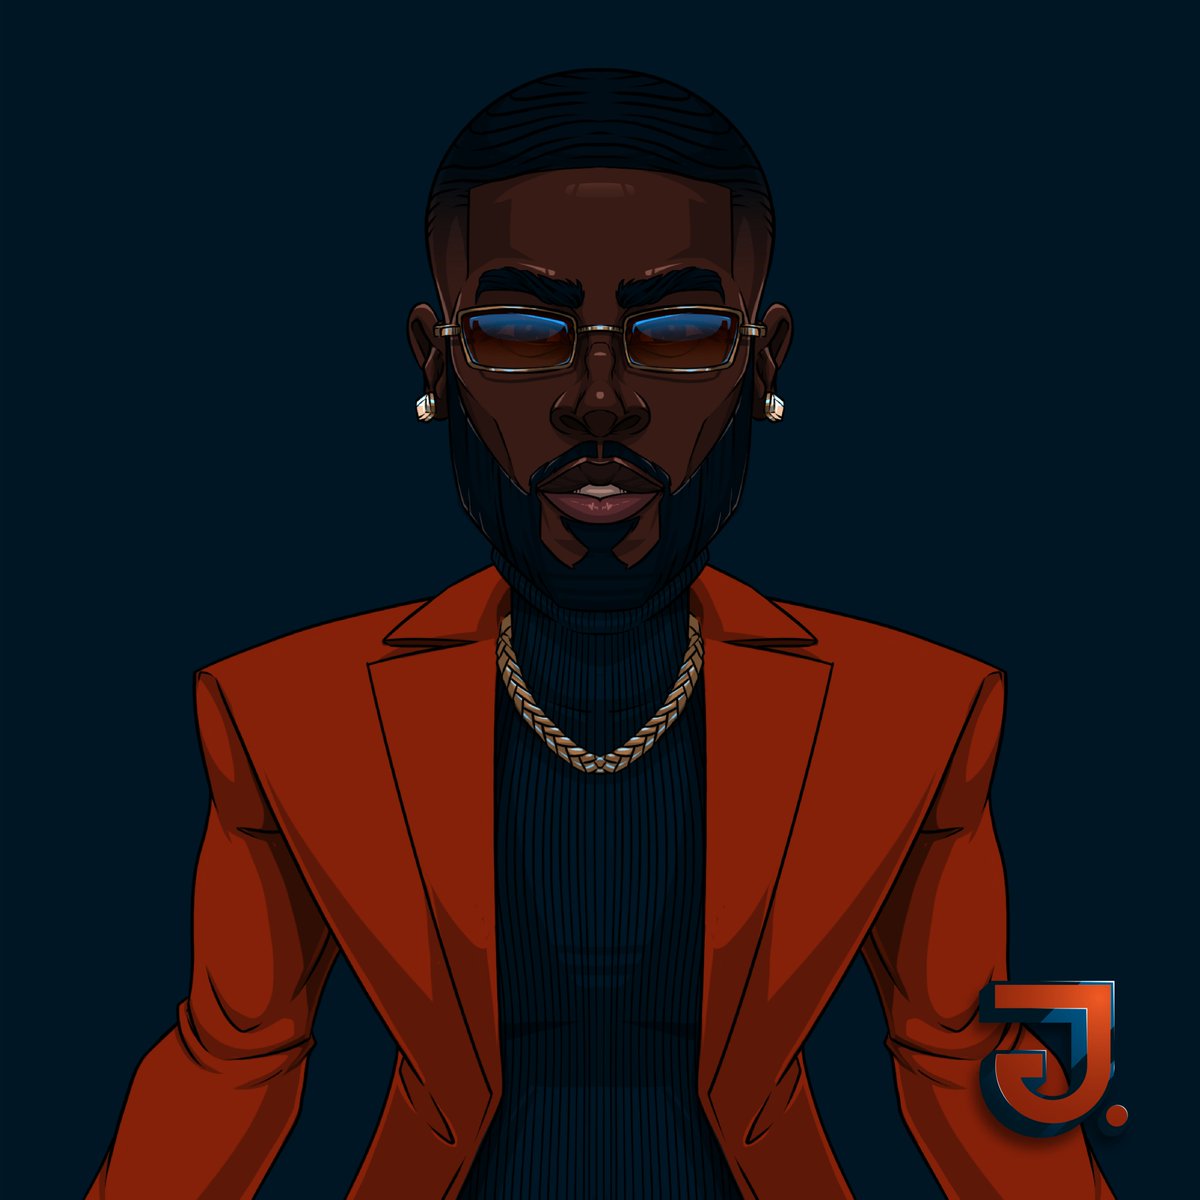 Hey check out this drawing I did for @therealdonnysavage 🔥🔥🔥
.
.
.
@procreate 
#procreate #cleanart #art #symetrical #rusticorange #shades #beard #model #fashion #photography #style #modeling #actor #fashionblogger #influencer #influencers #fly #design #vnffw #nyfw #vnfinsider